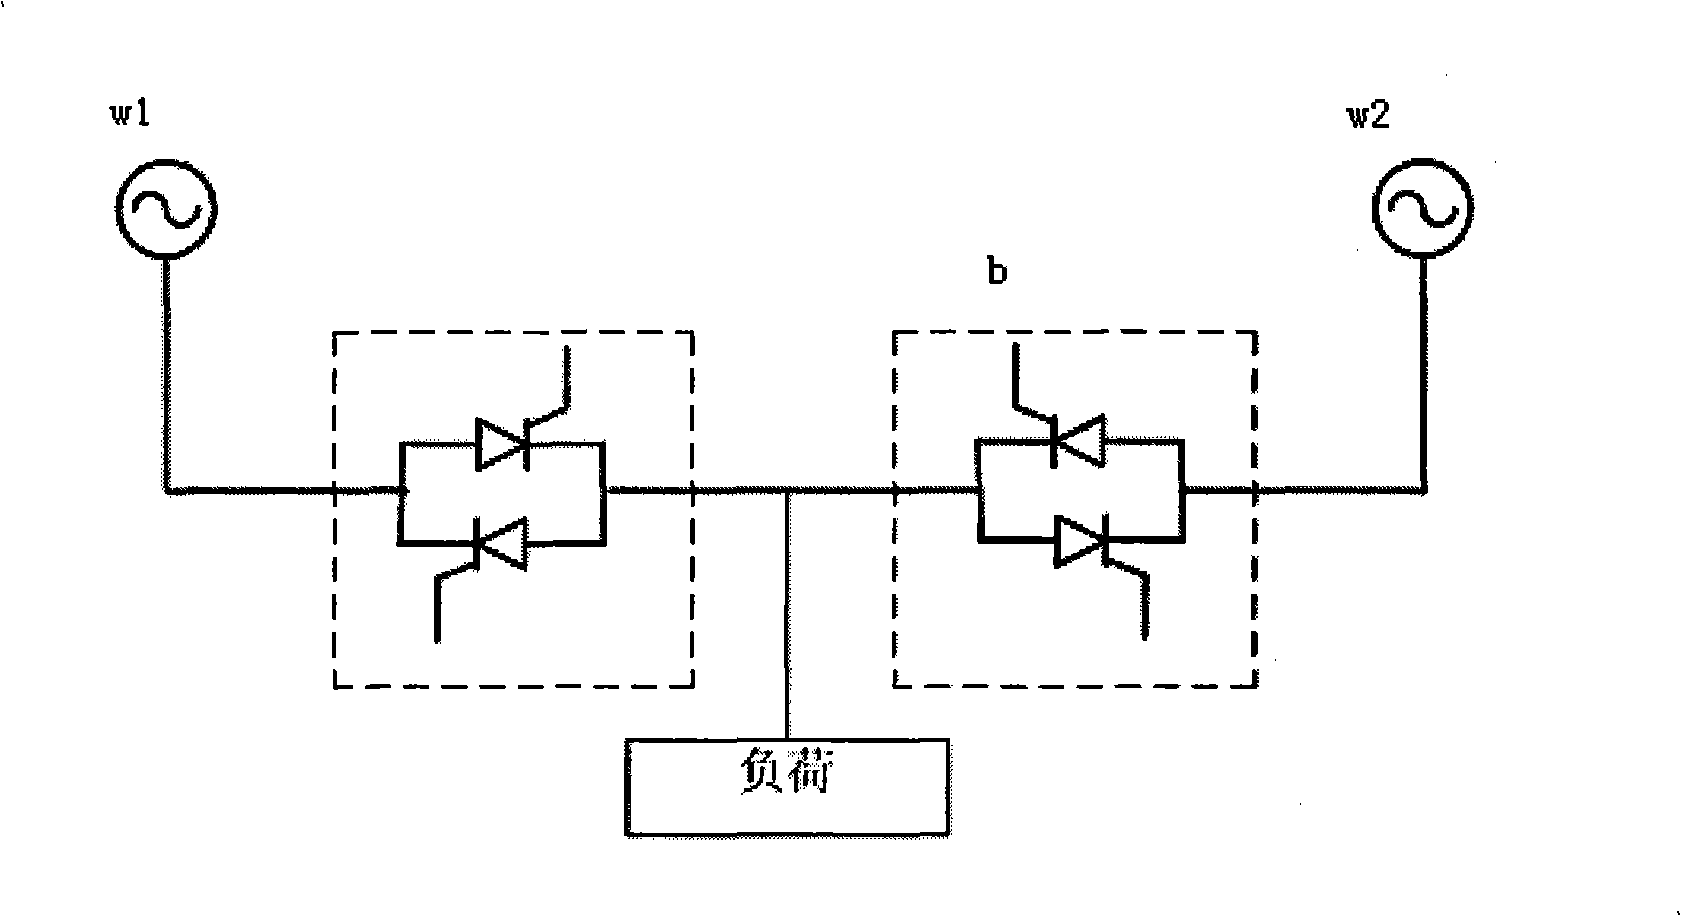 Self-cooled thyristor valve of high power and mounting vehicle